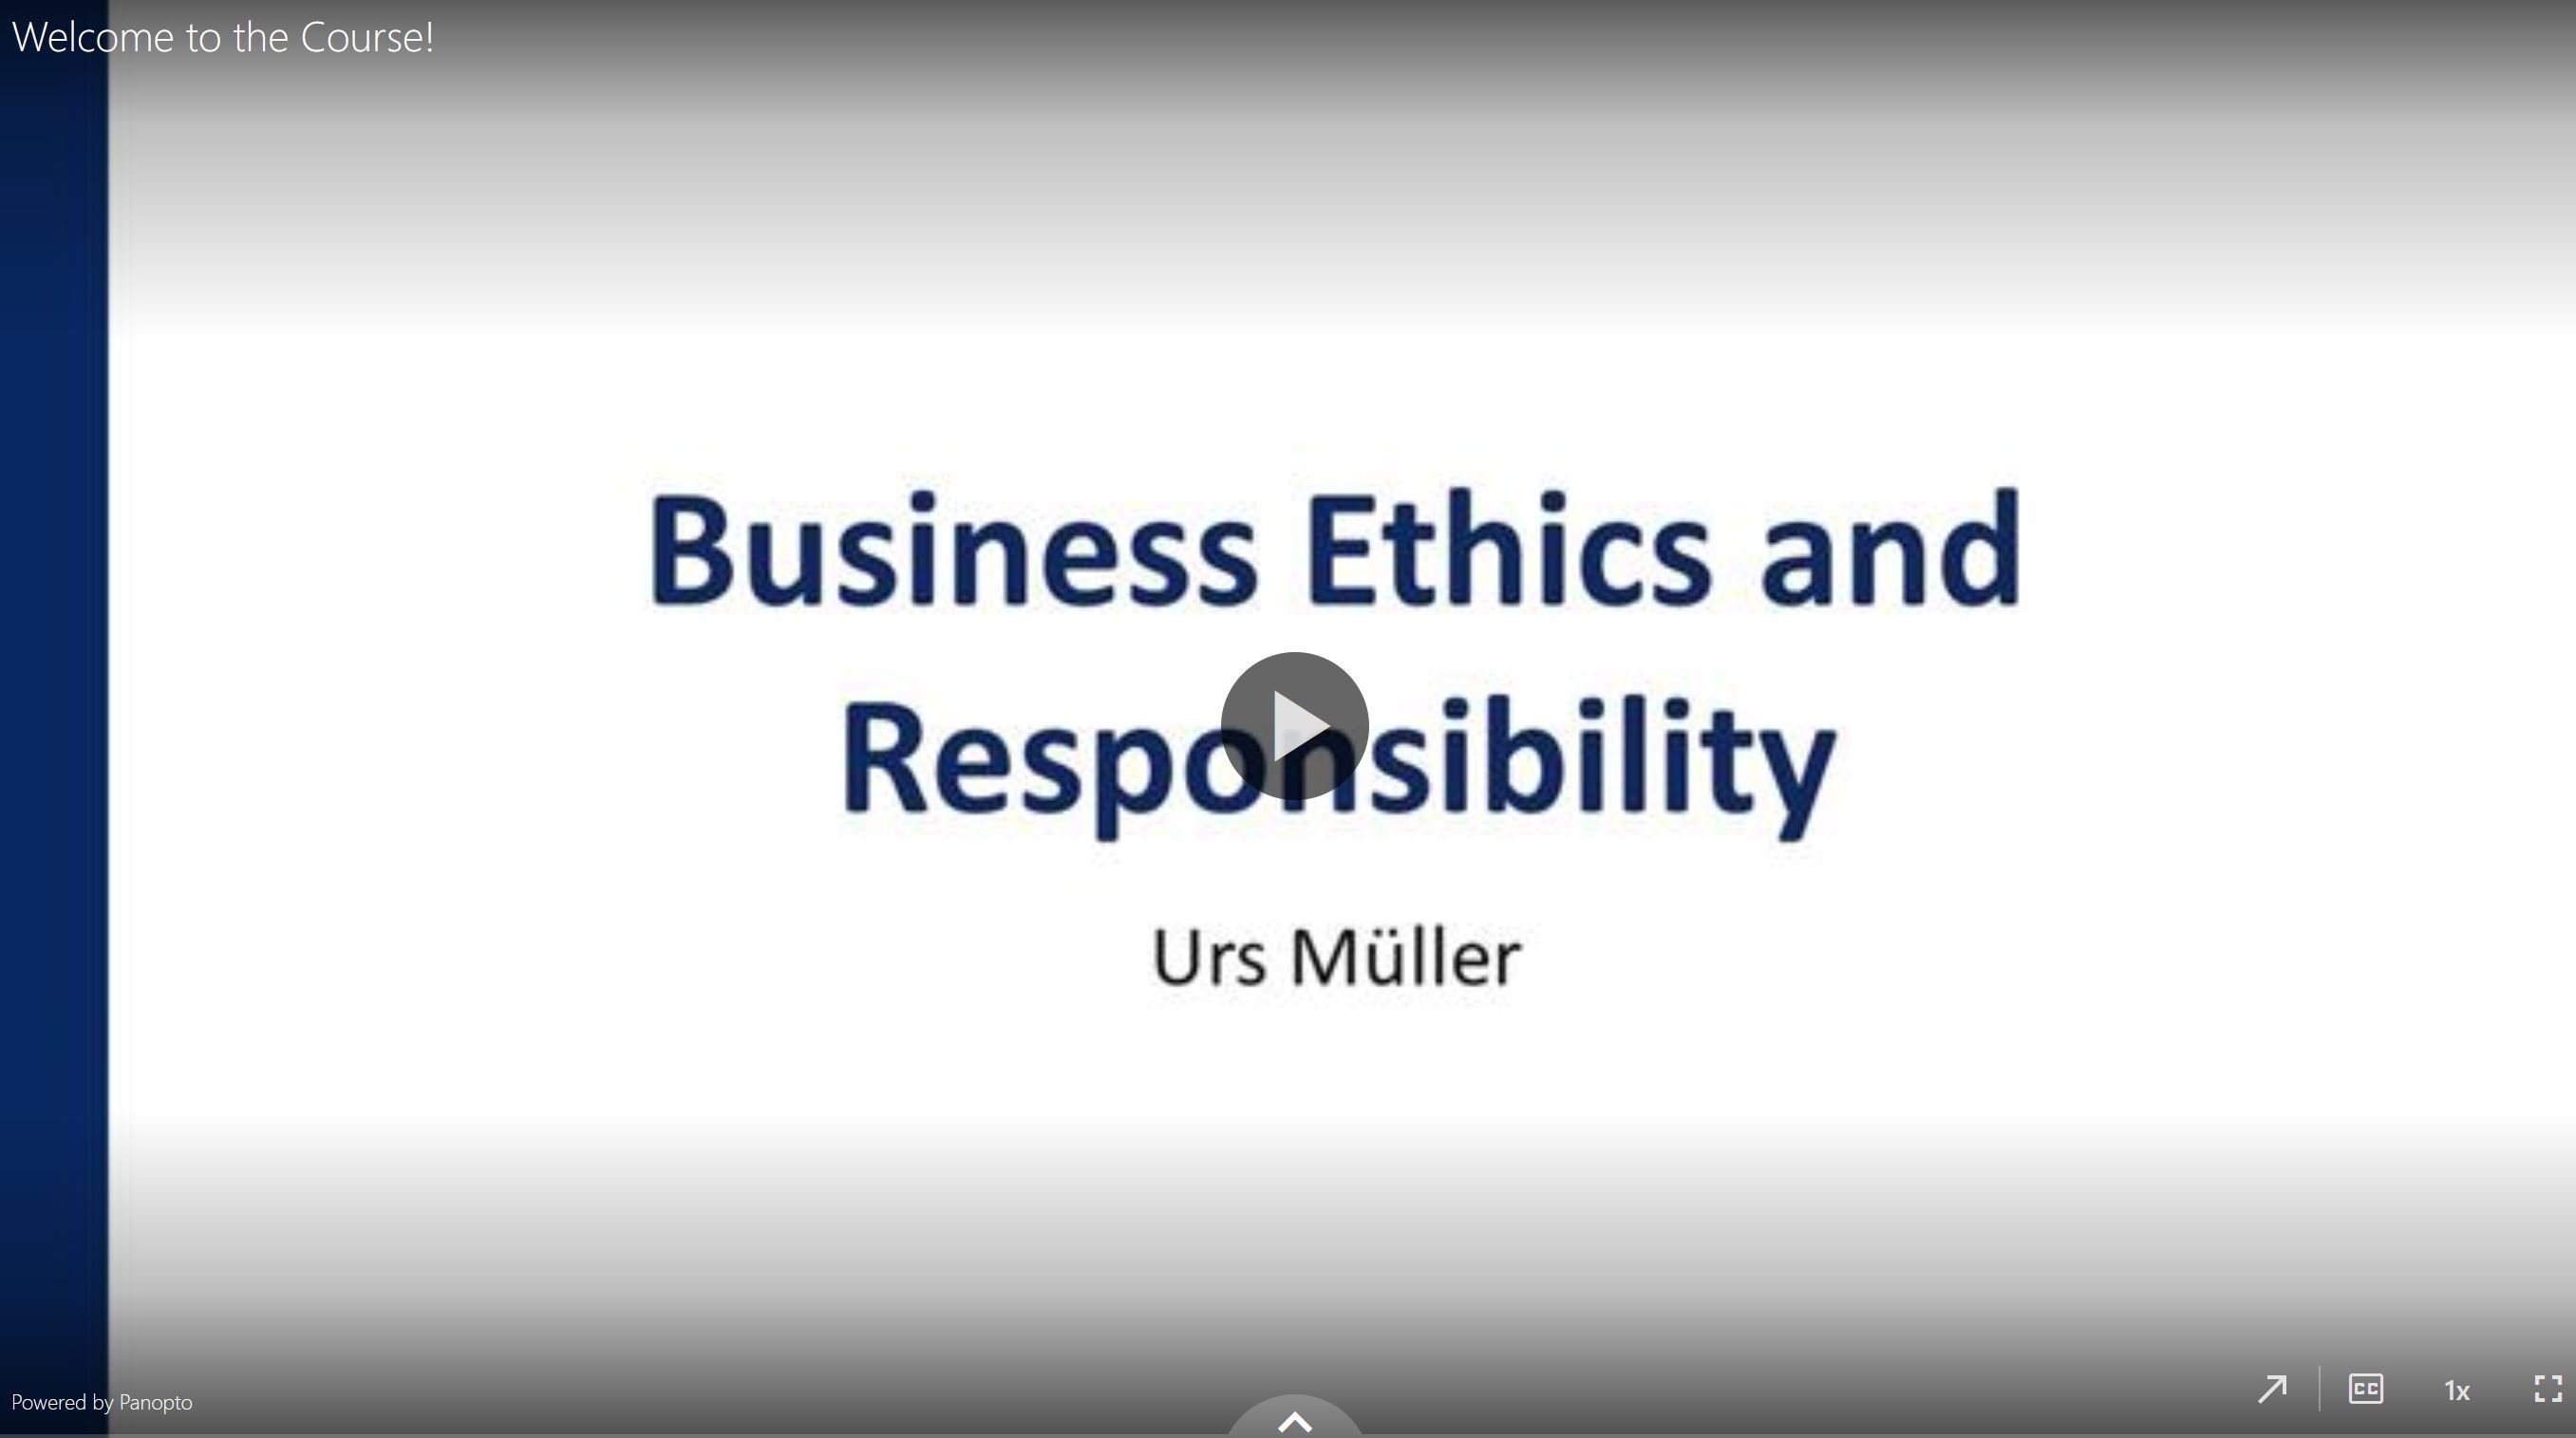 Ethics and Responsibility Course Intro